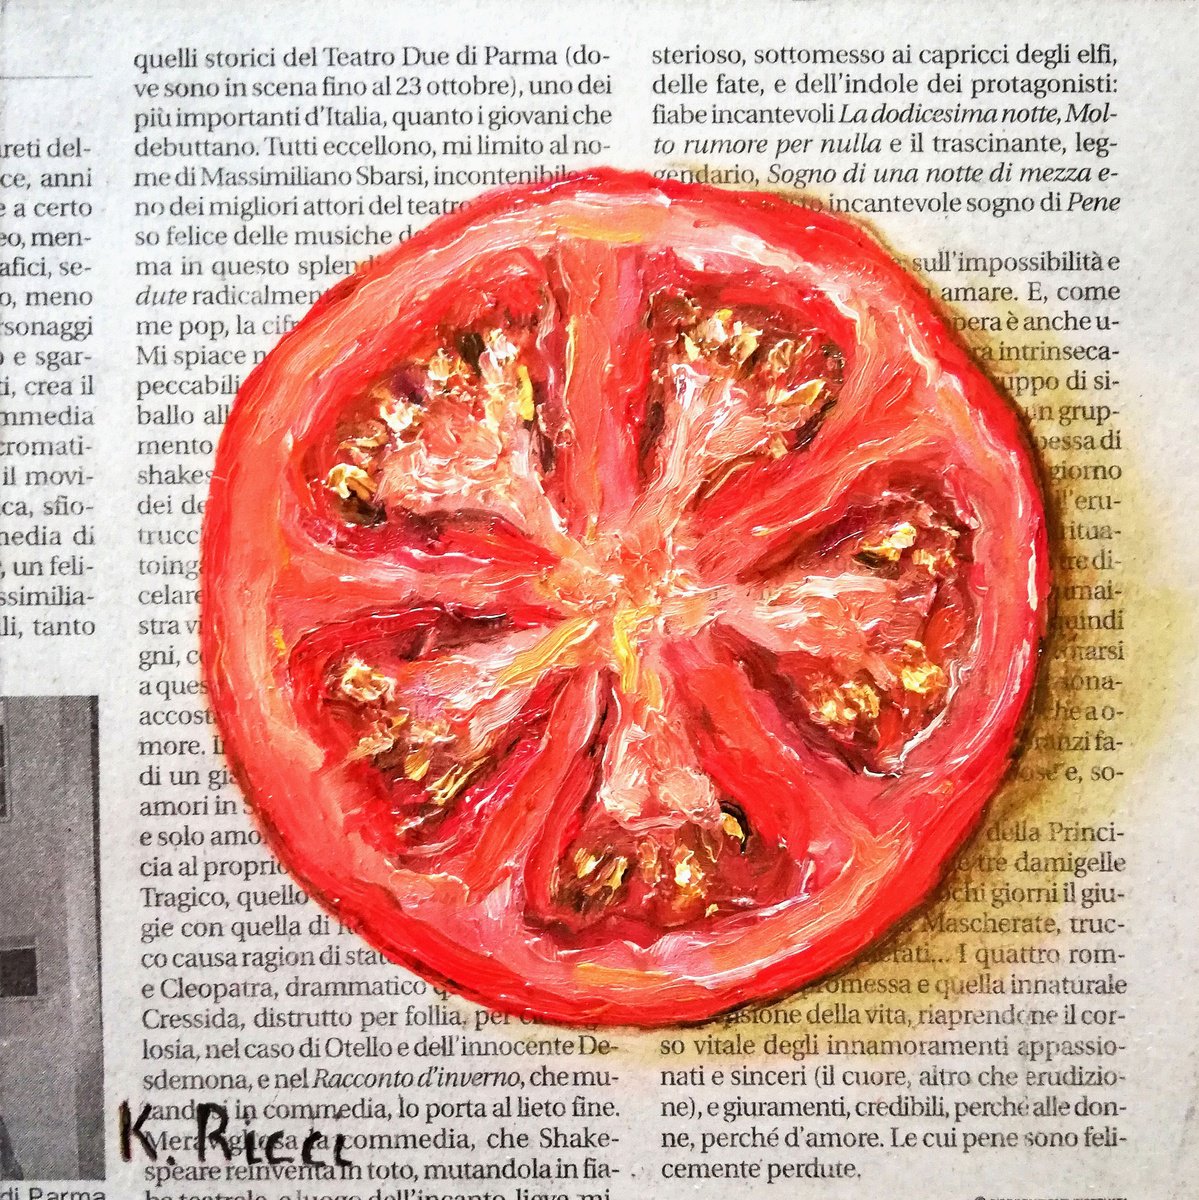 Tomato on Newspaper Original Oil on Wooden Hardboard Painting 6 by 6 inches (15x15 cm) by Katia Ricci